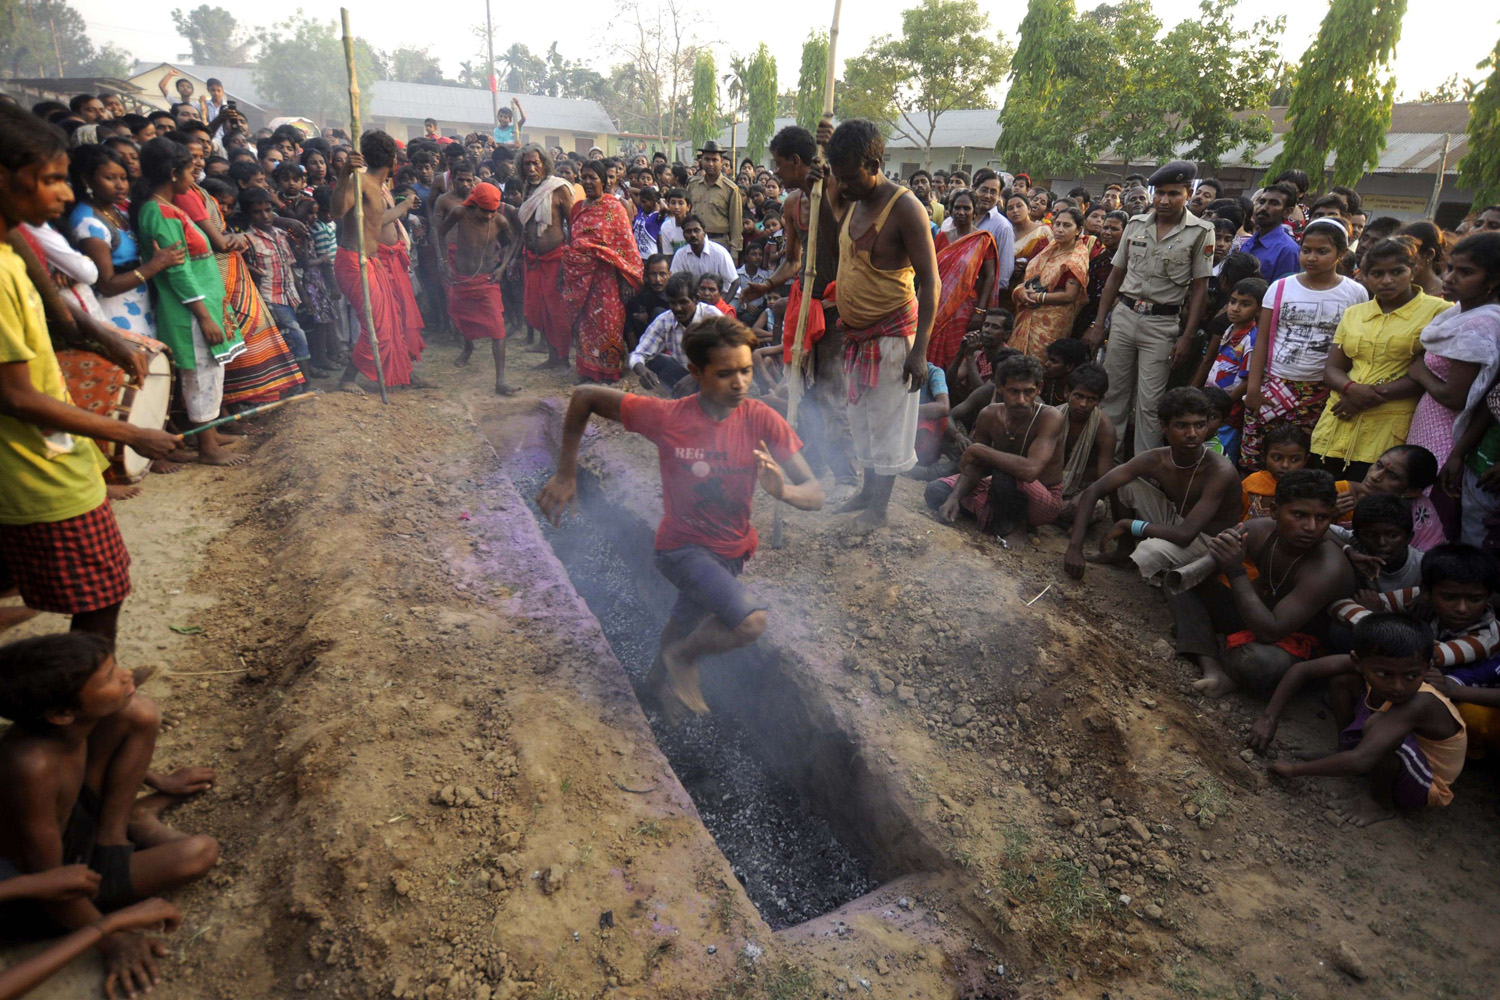 A Hindu devotee runs over smouldering charcoal during the ritual of Shiva Gajan at Pratapgarh village in Agartala, the capital of northeastern Indian state of Tripura, on April 14, 2014.